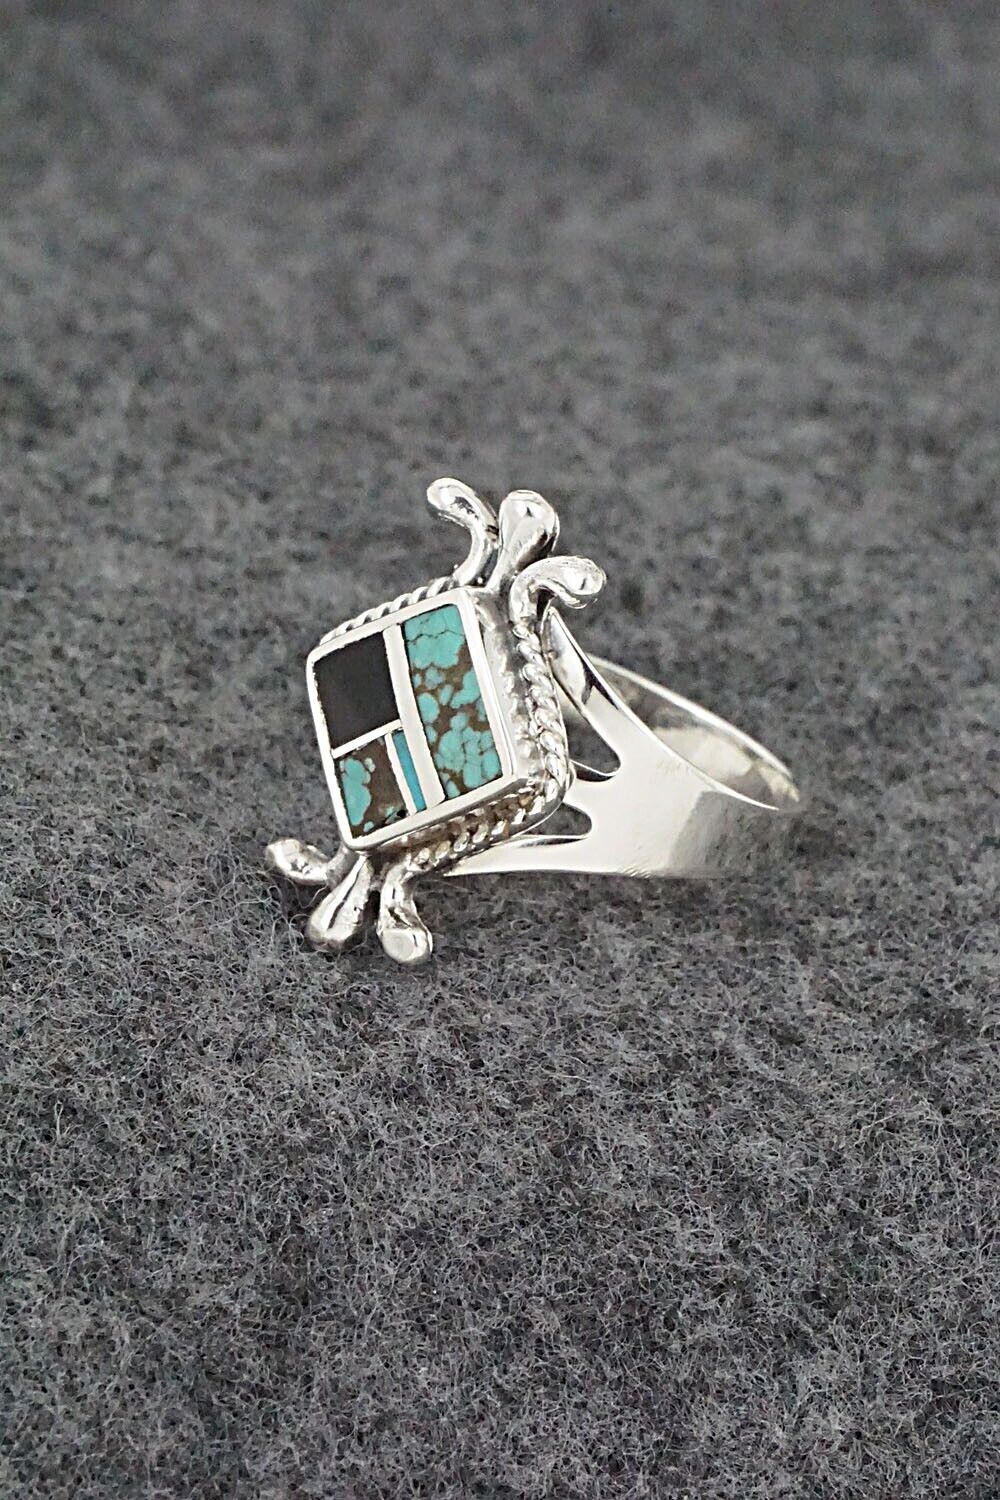 Turquoise, Onyx & Sterling Silver Inlay Ring - James Manygoats - Size 7.5